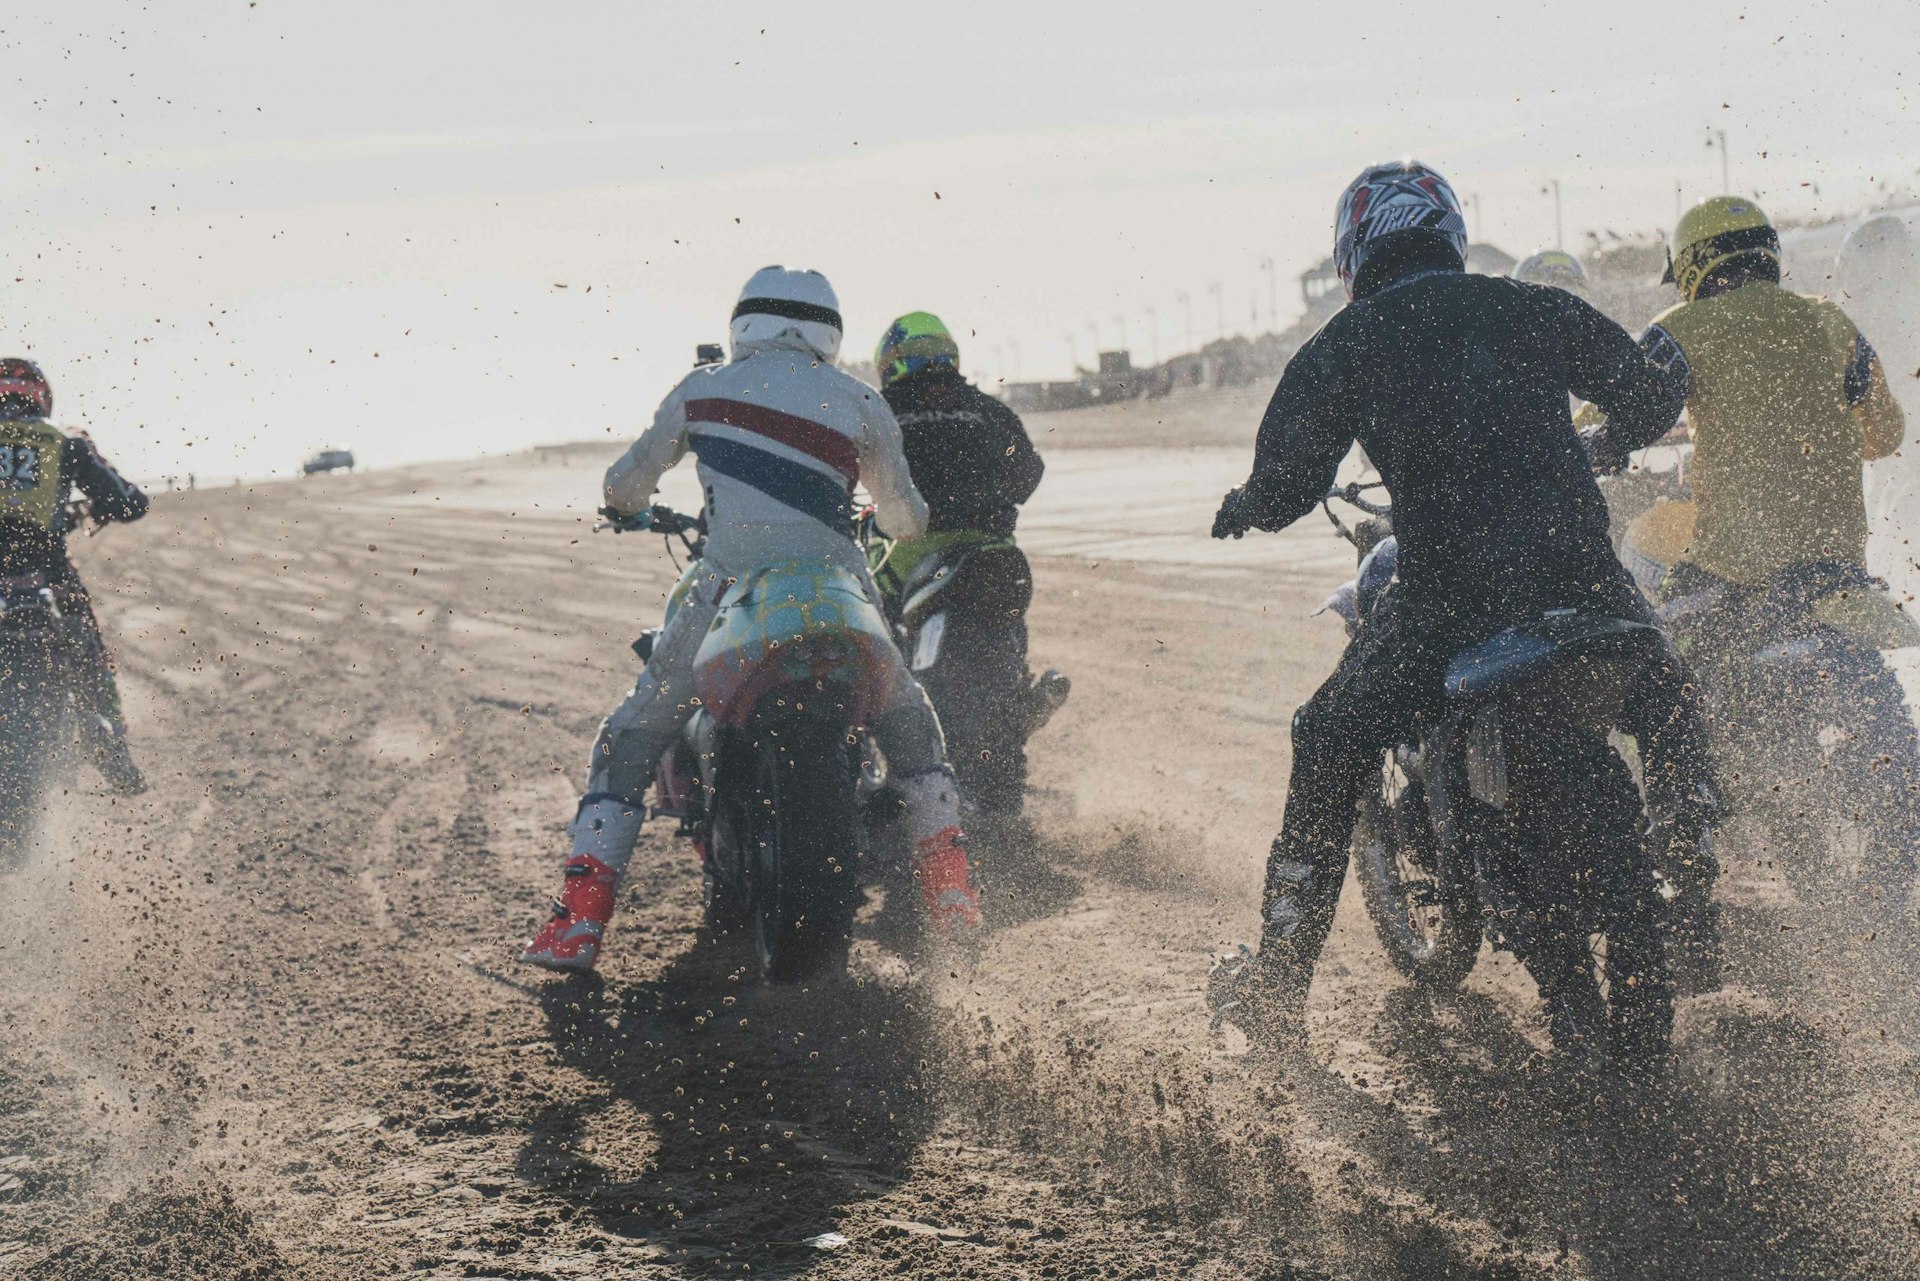 Mablethorpe Sand Race: a uniquely British beach rally